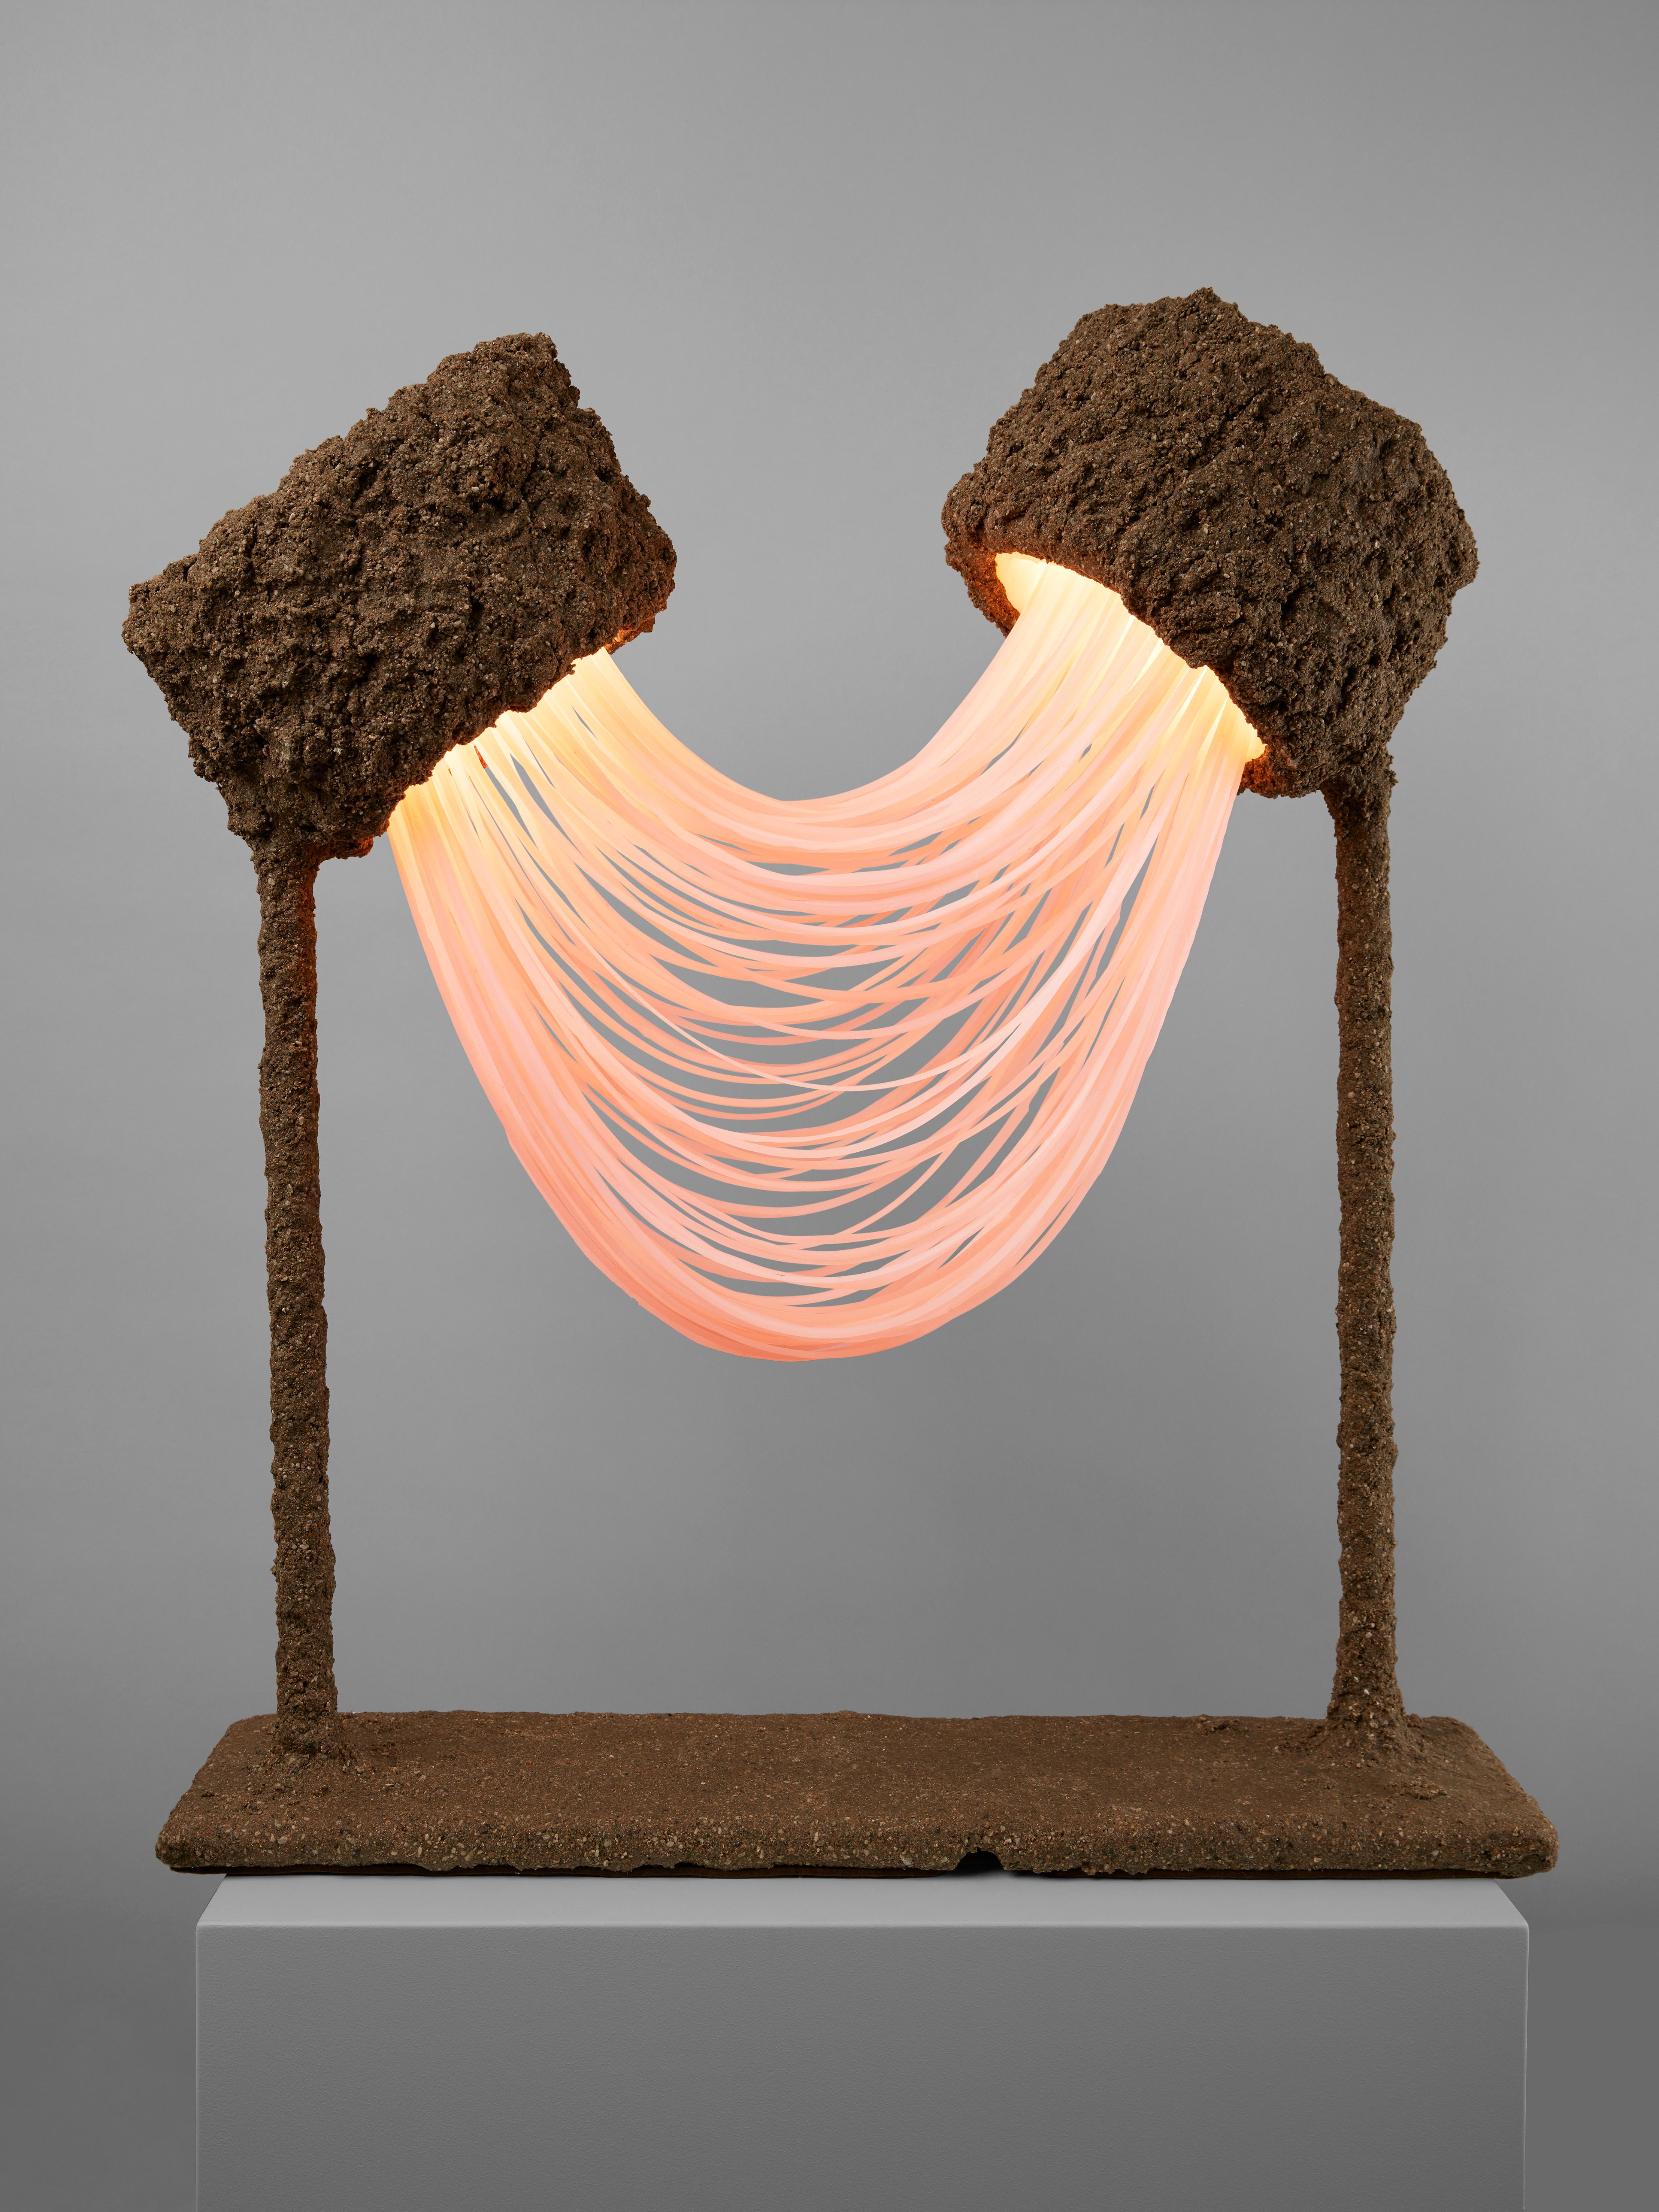 This unique light sculpture is part of Nacho Carbonell’s 'Luciferase' series exclusively produced for Galerie BSL since 2011. Historically, 'Luciferase' is Carbonell’s first work incorporating light. “The root of this word luciferase is ‘carrier of